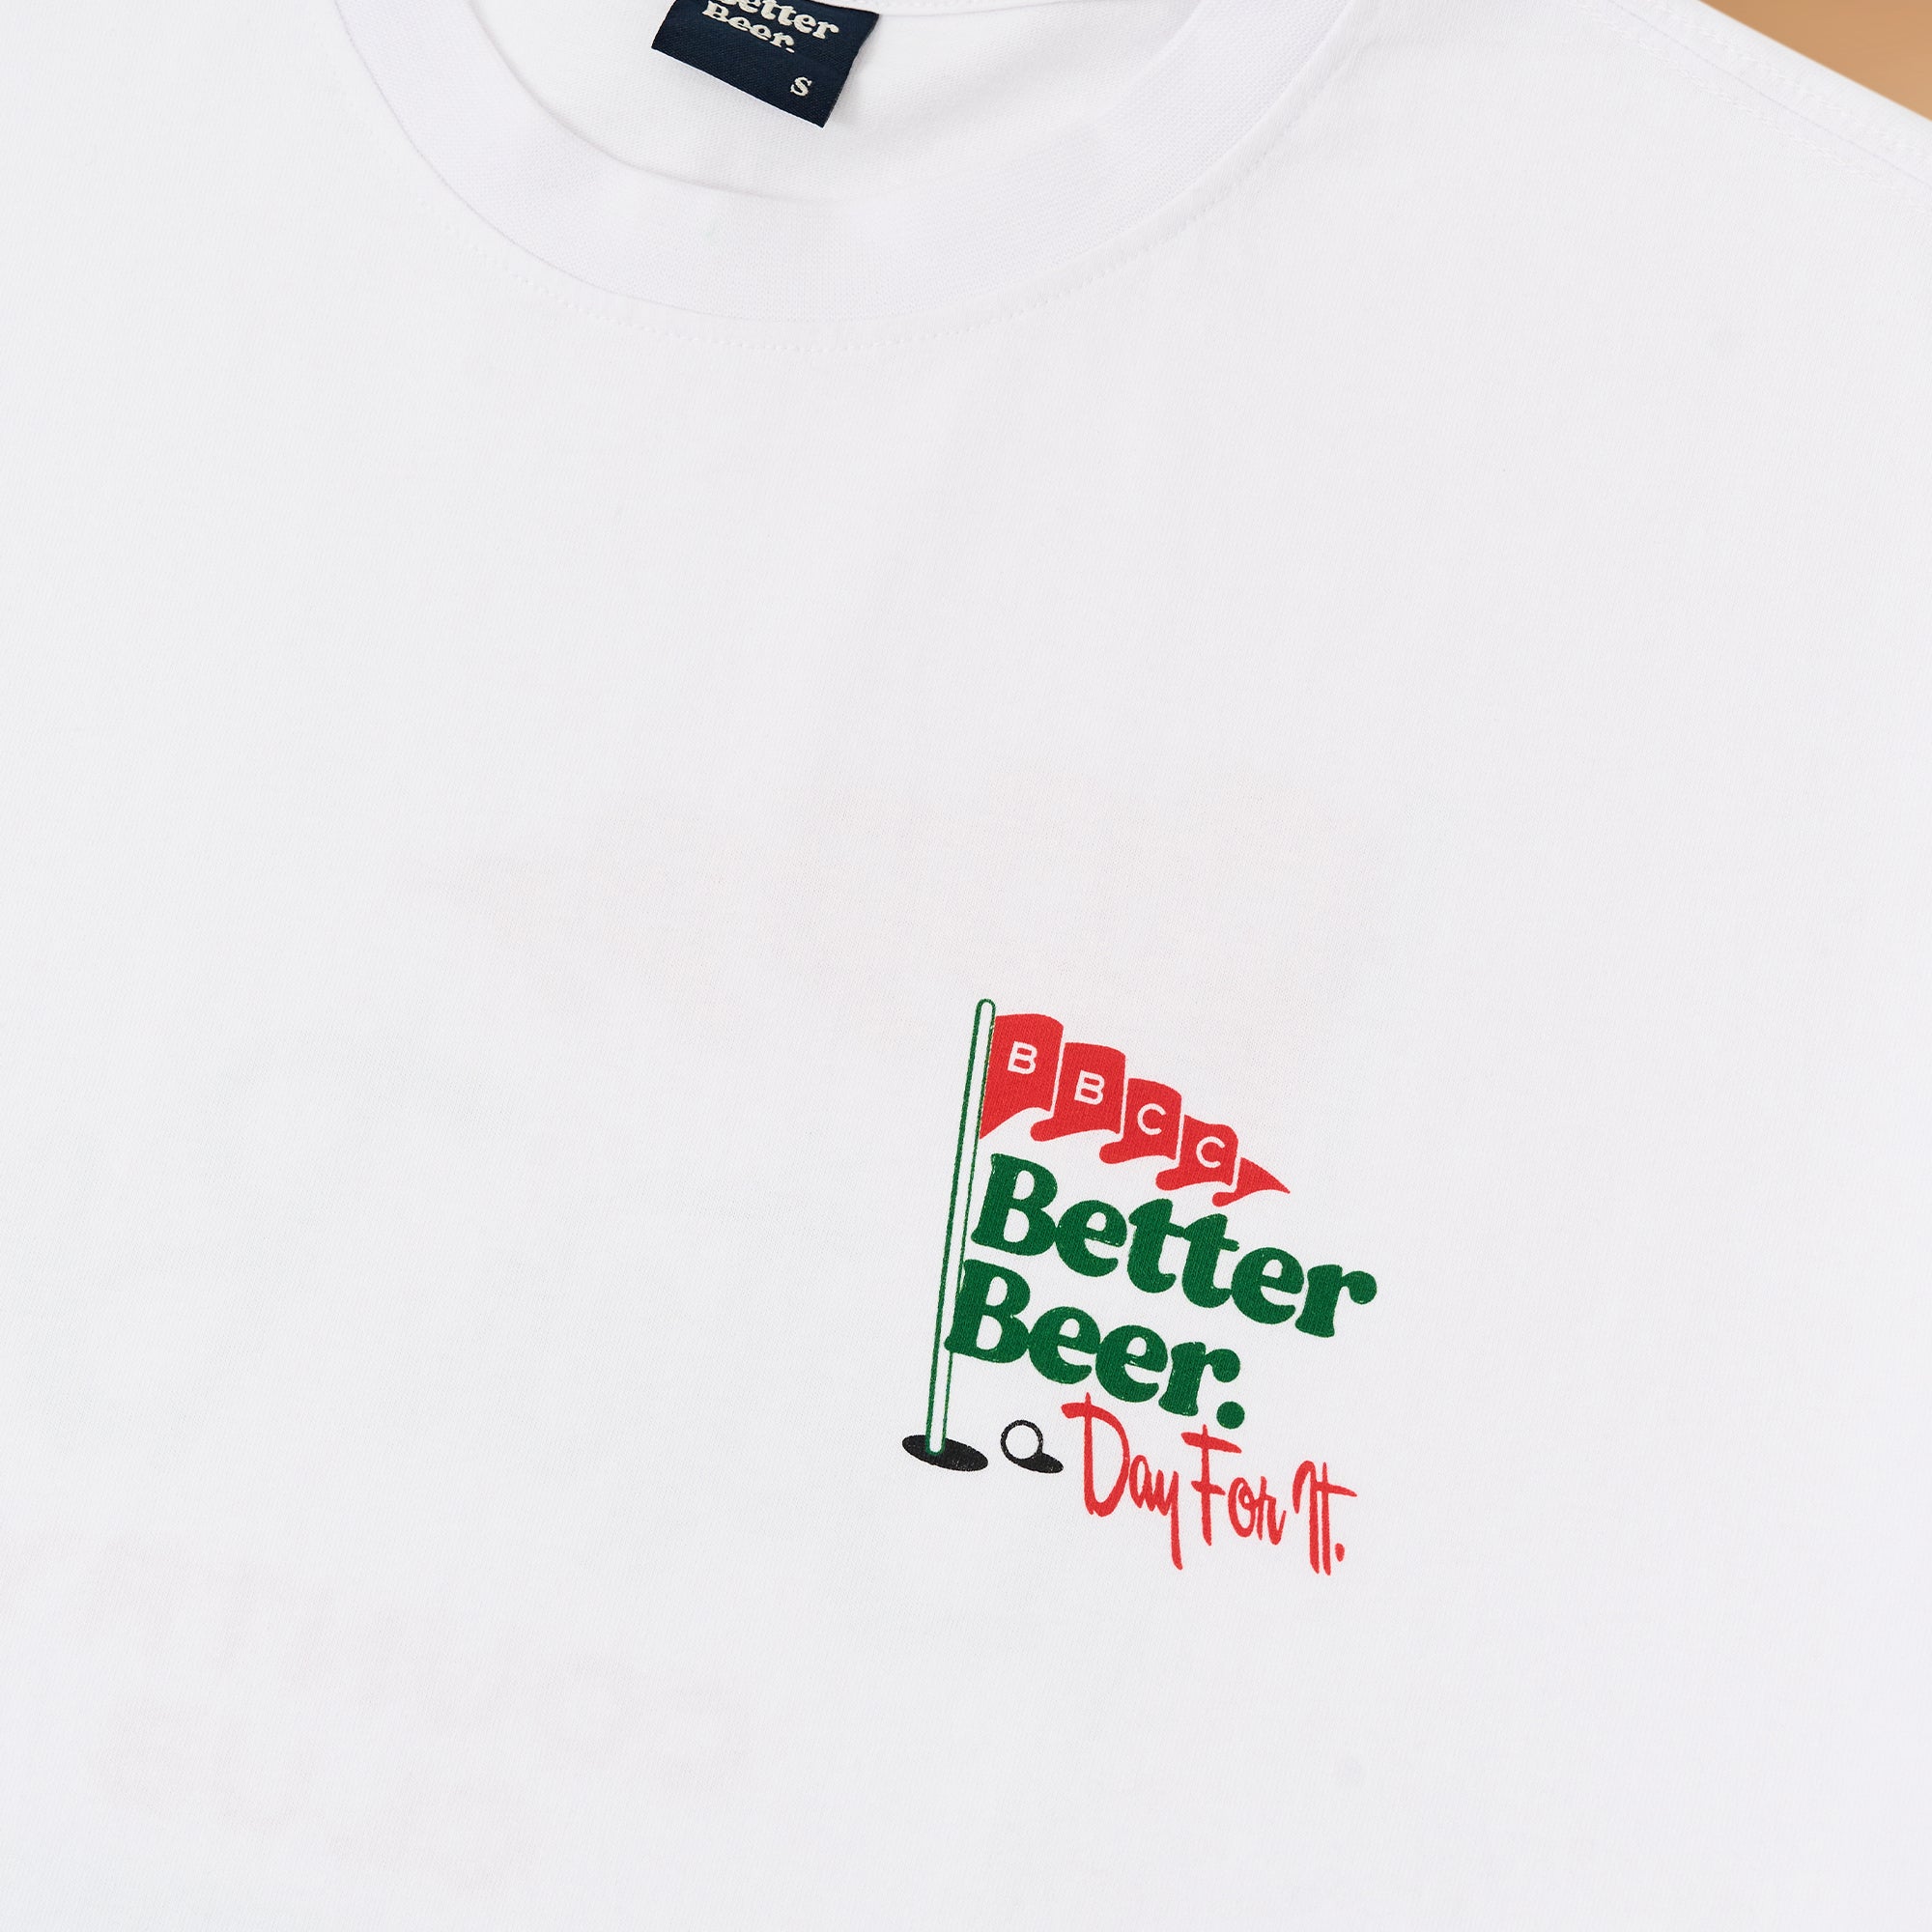 Better Beer Country Club Tee